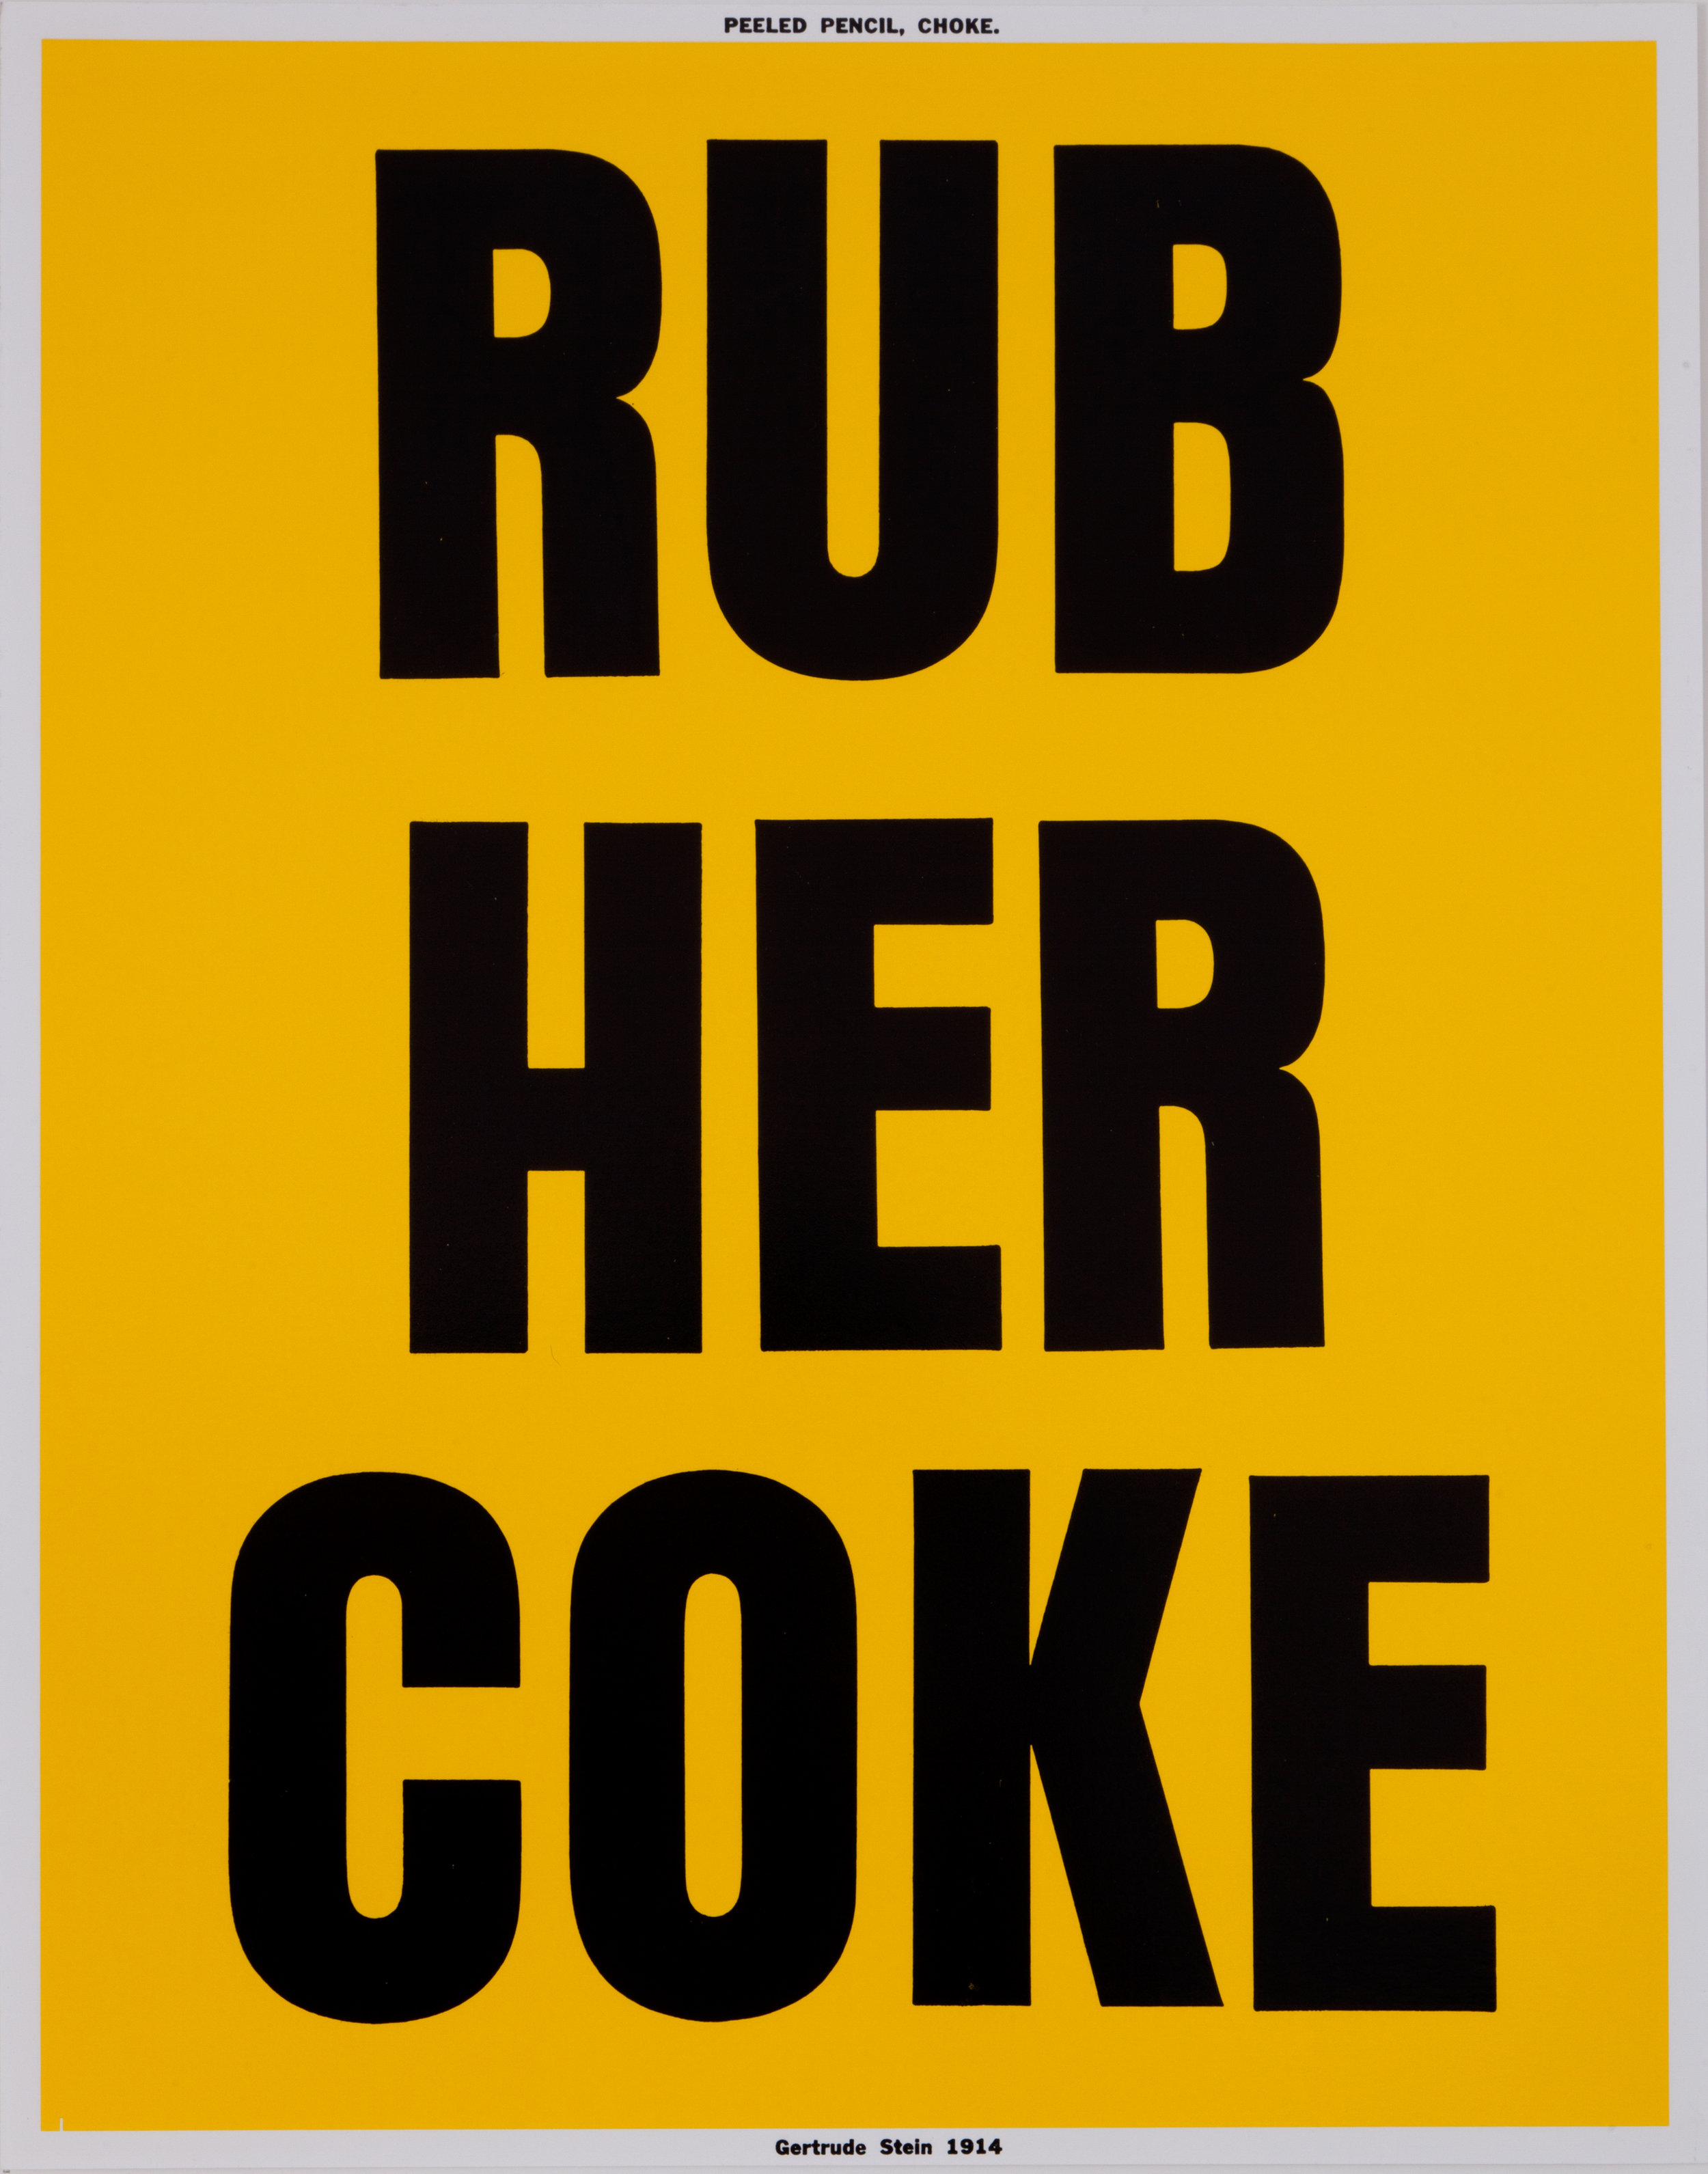  Eve Fowler,  rub her coke , from  a spectacle and nothing strange , 2011–12, a series of screen print posters, 28” x 22”. Courtesy of the artist.  